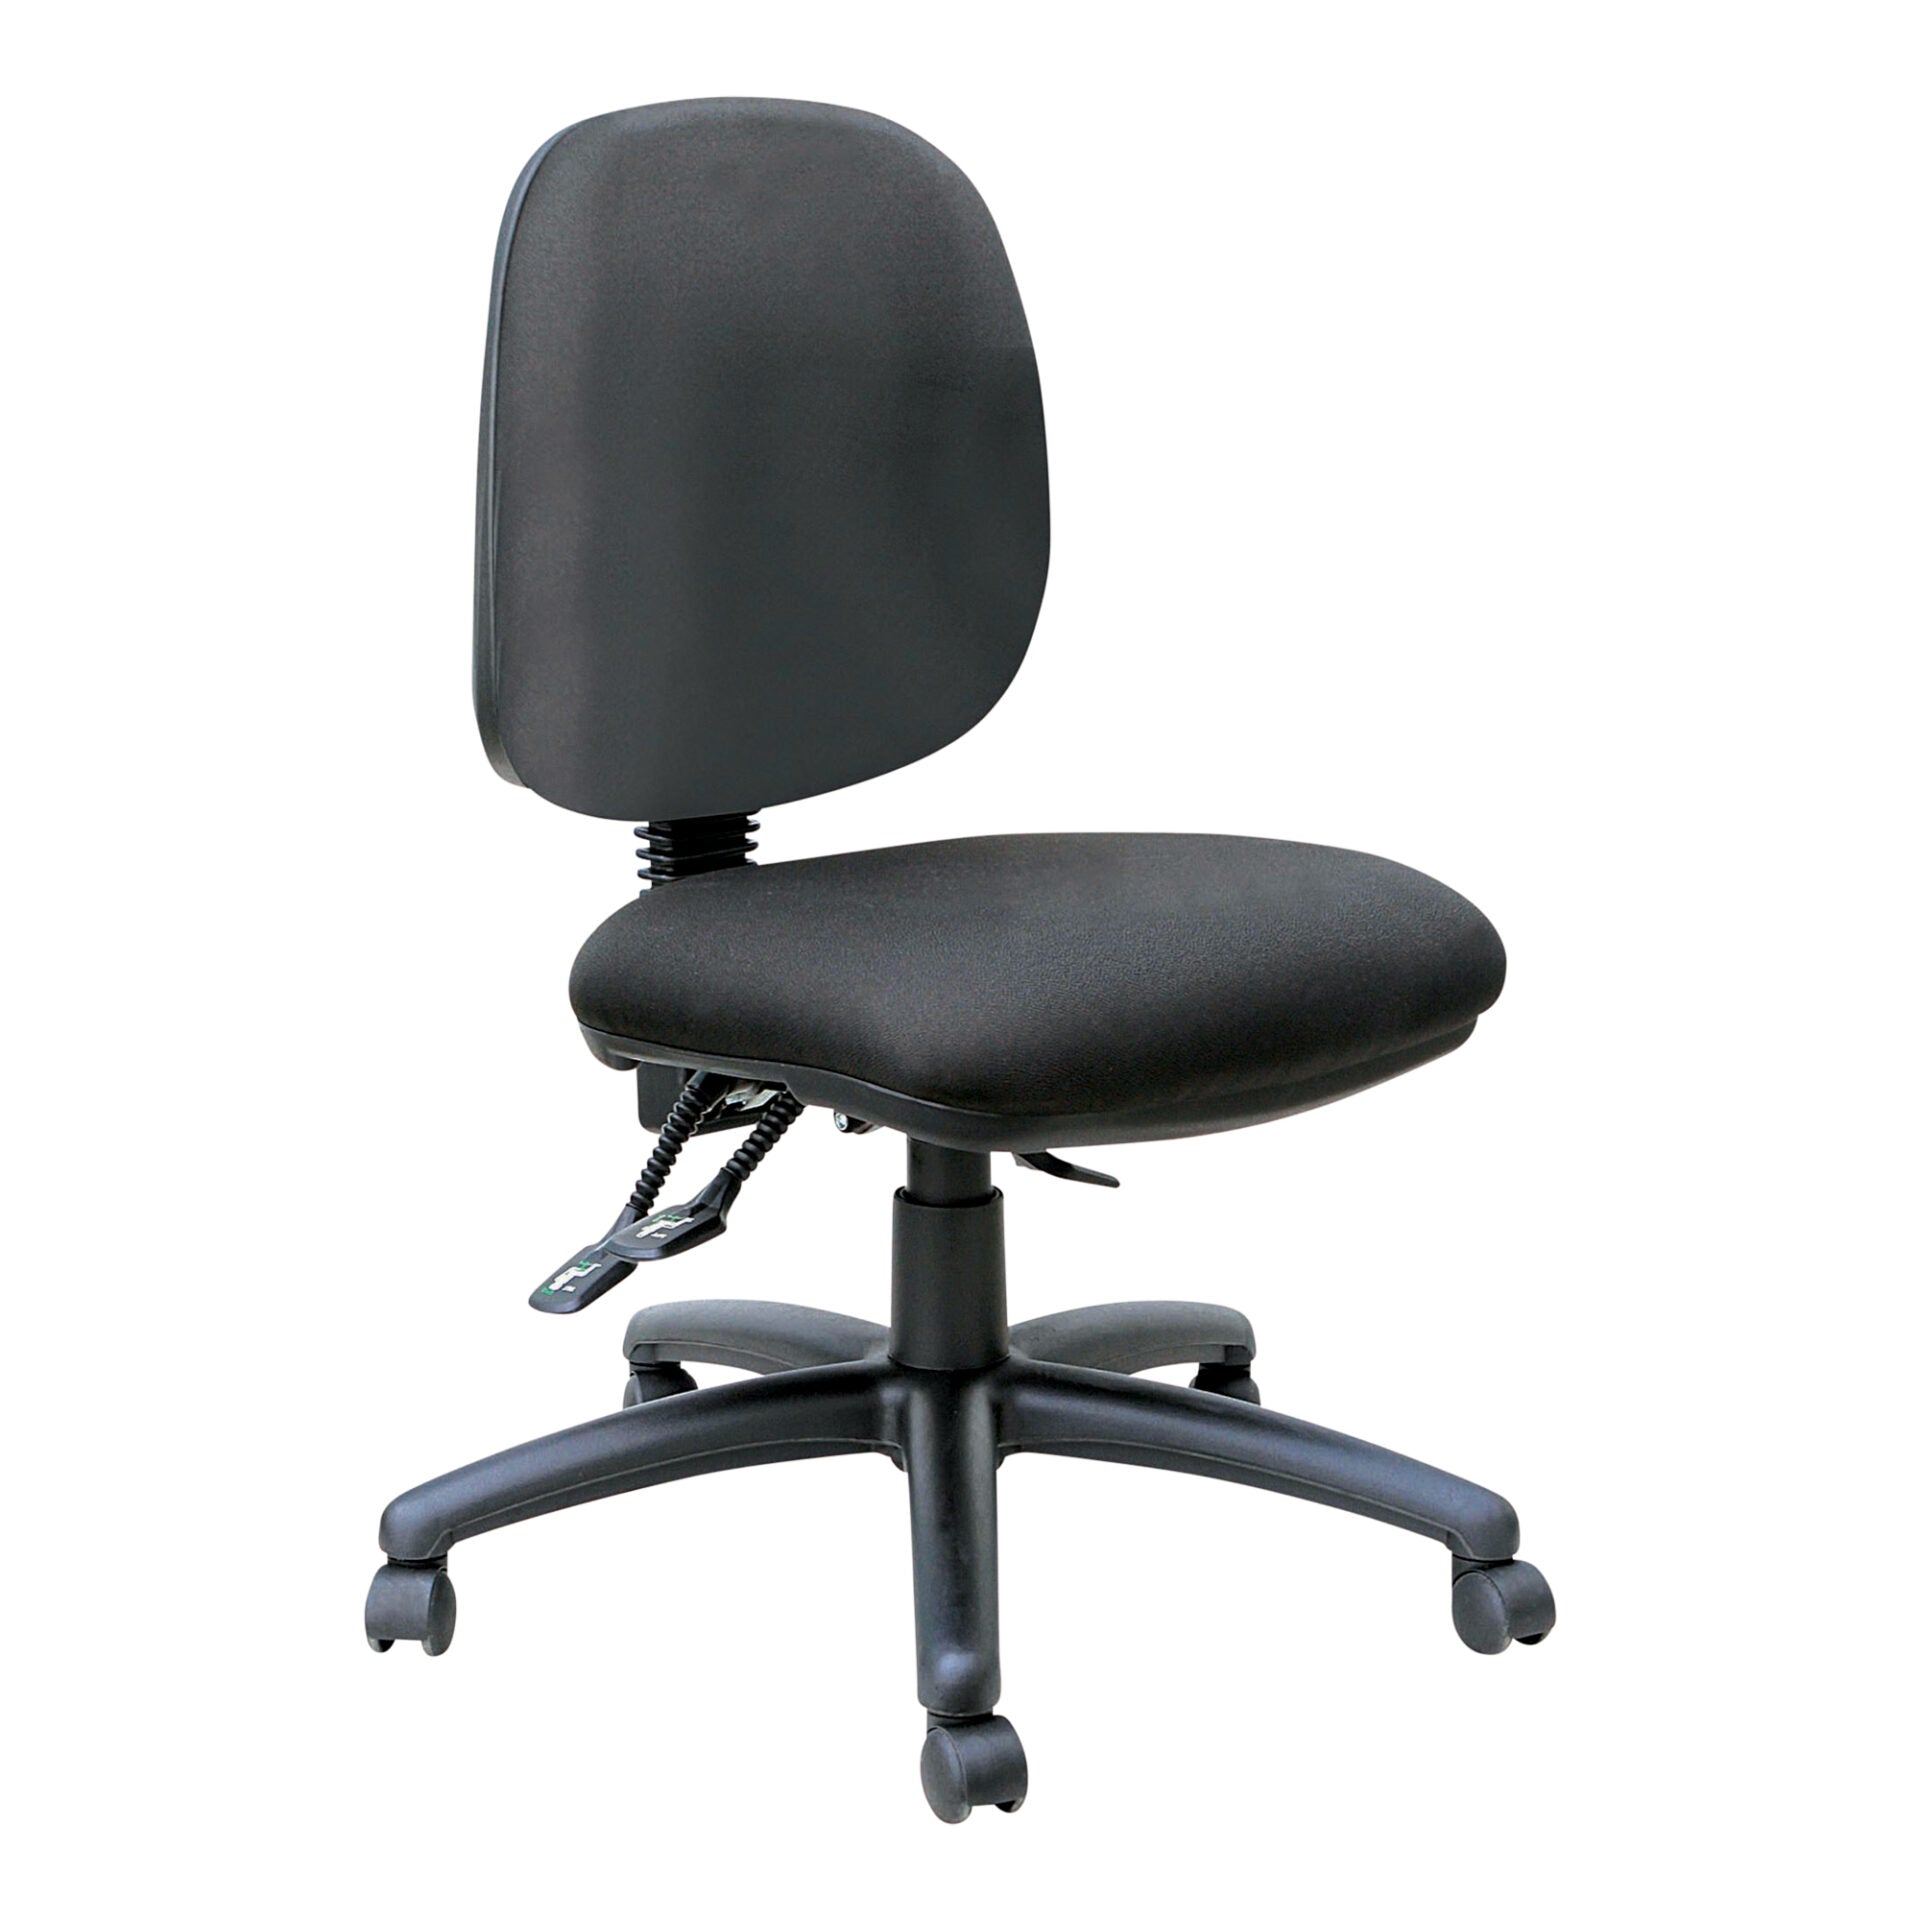 Mondo Java mid-back task chair in black, front view.